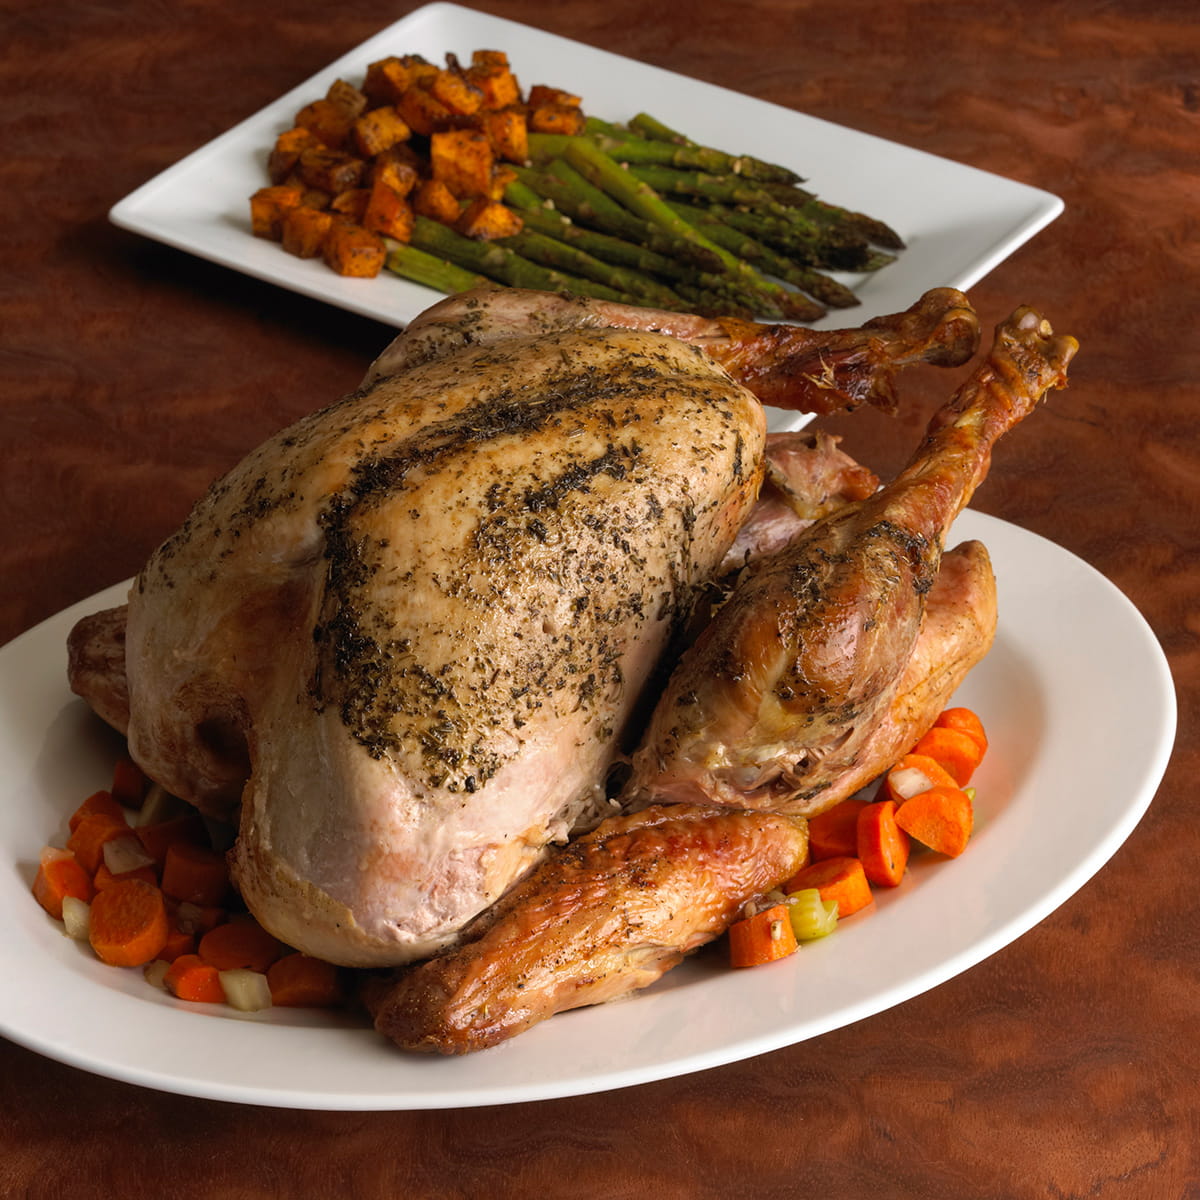 Moms Roasted Turkey with Butternut Squash and Asparagus